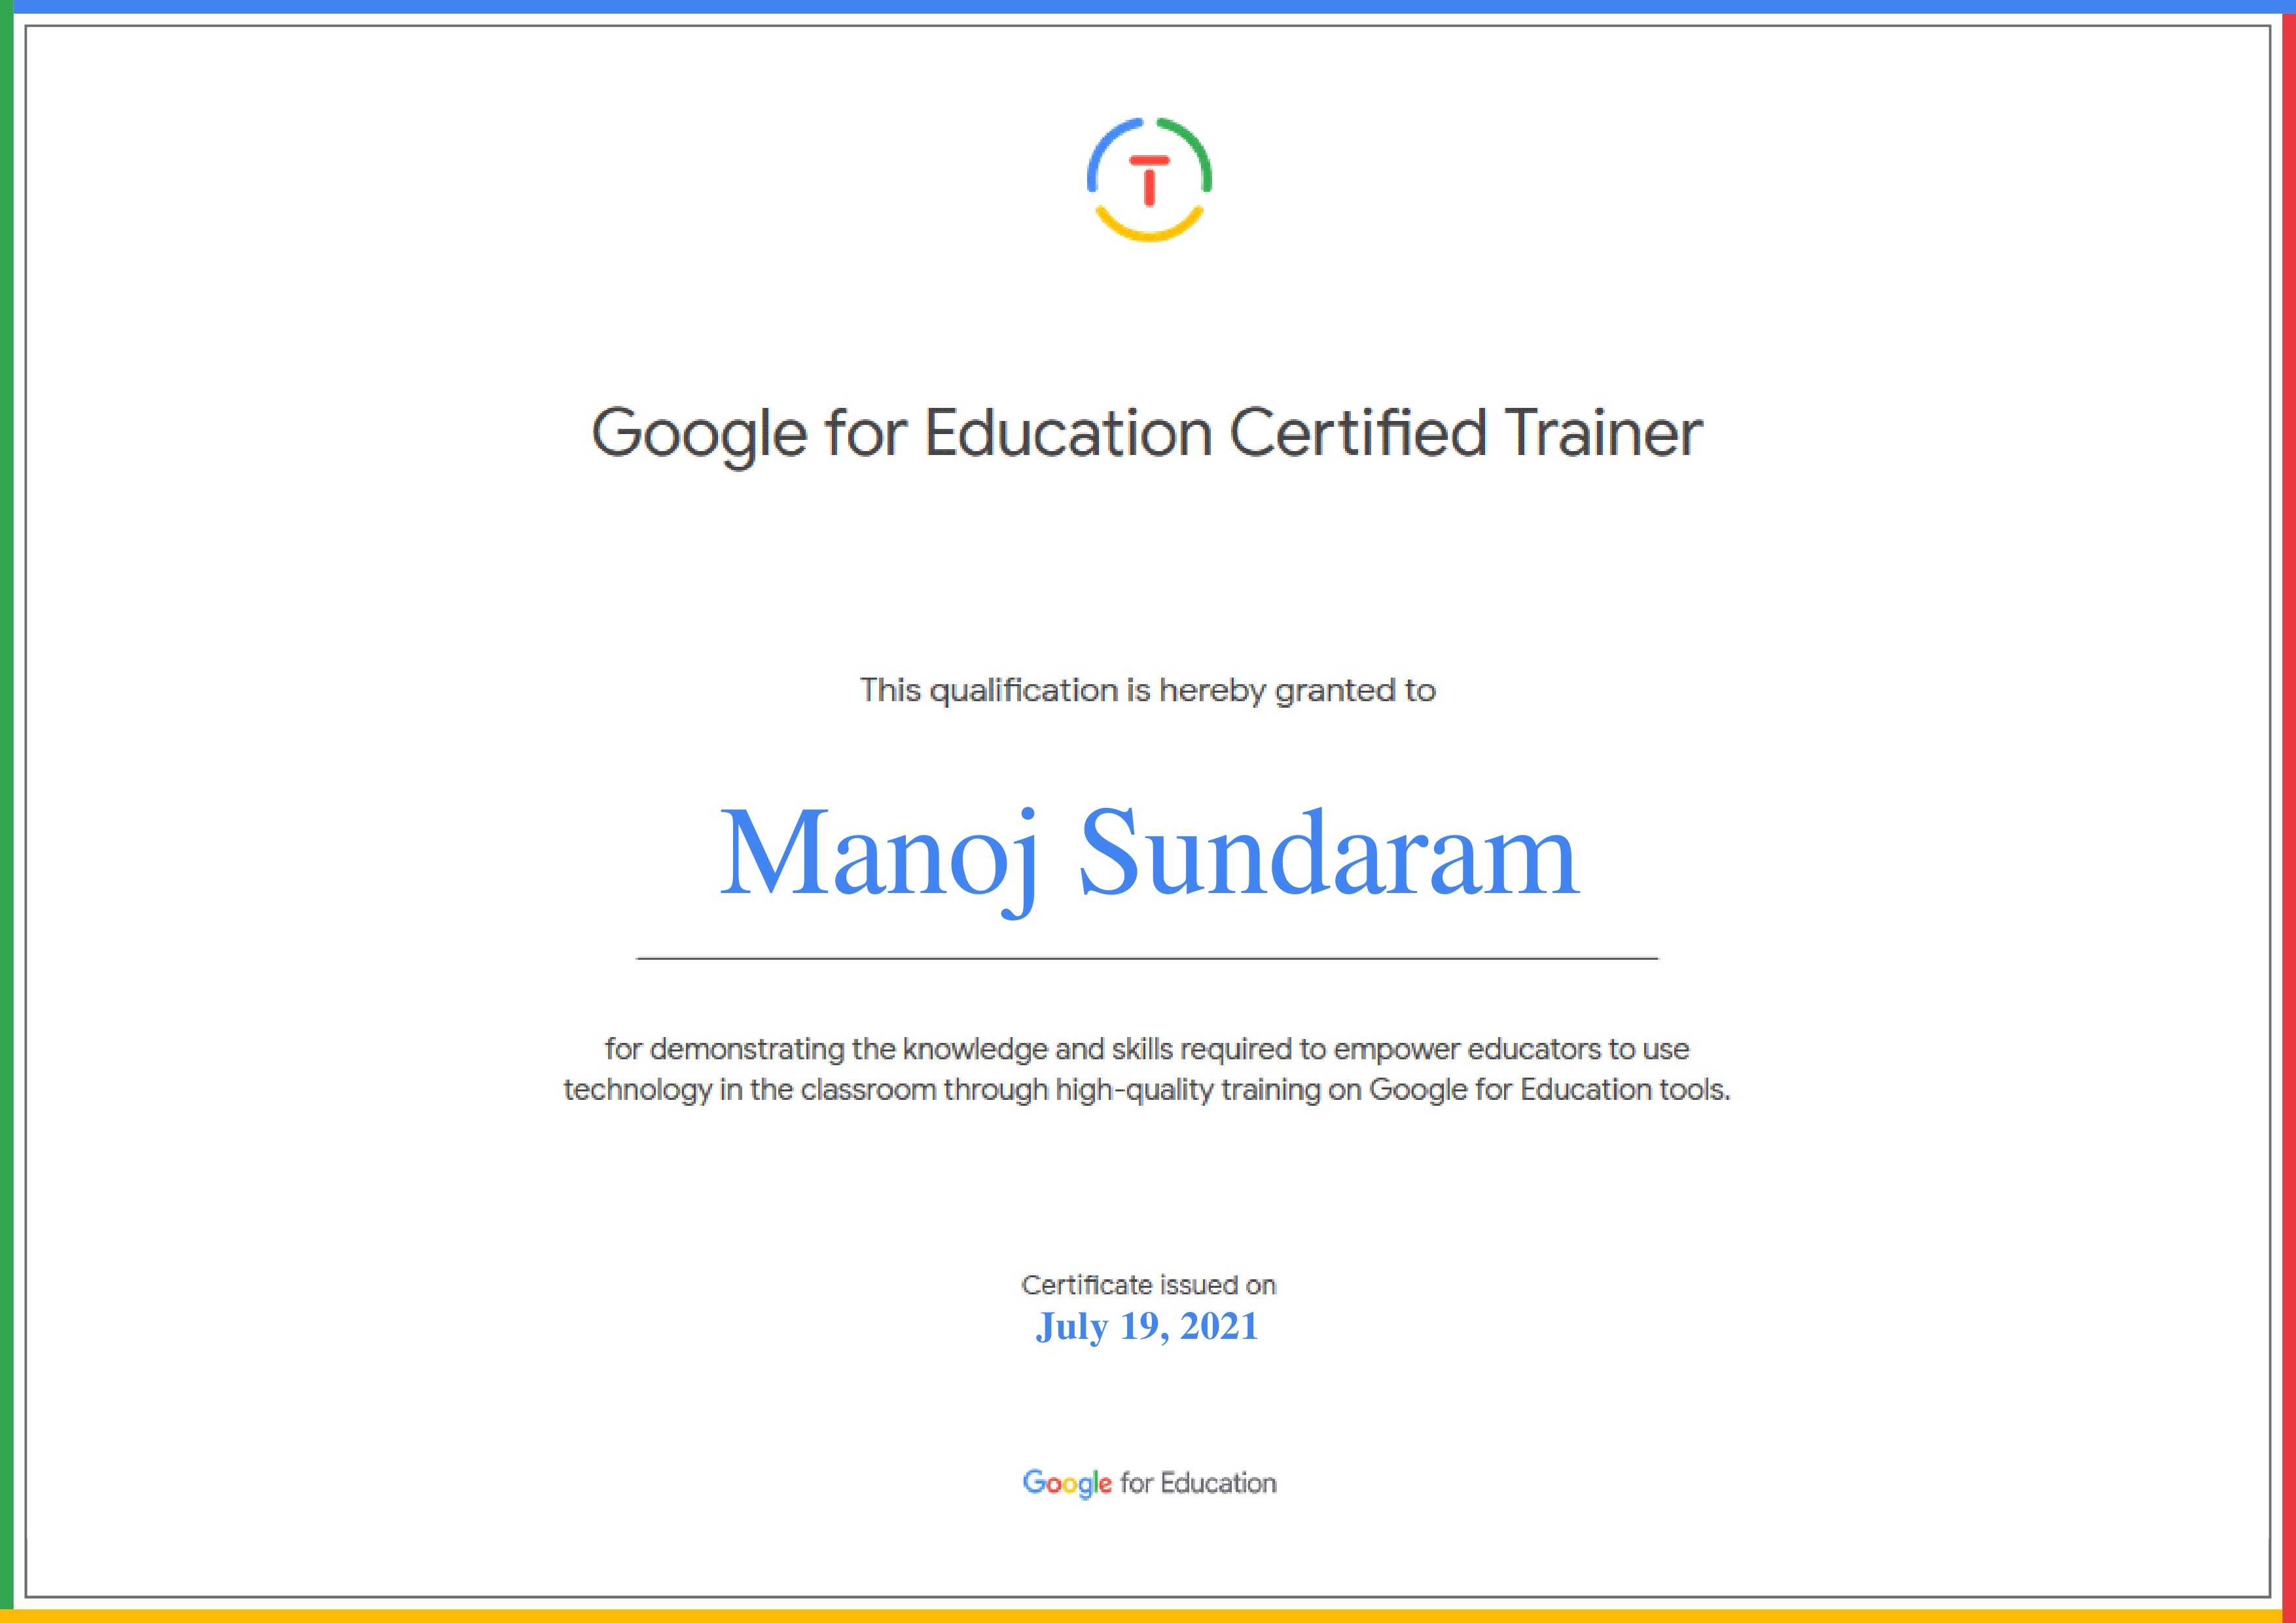 Google for Education Certified Trainer